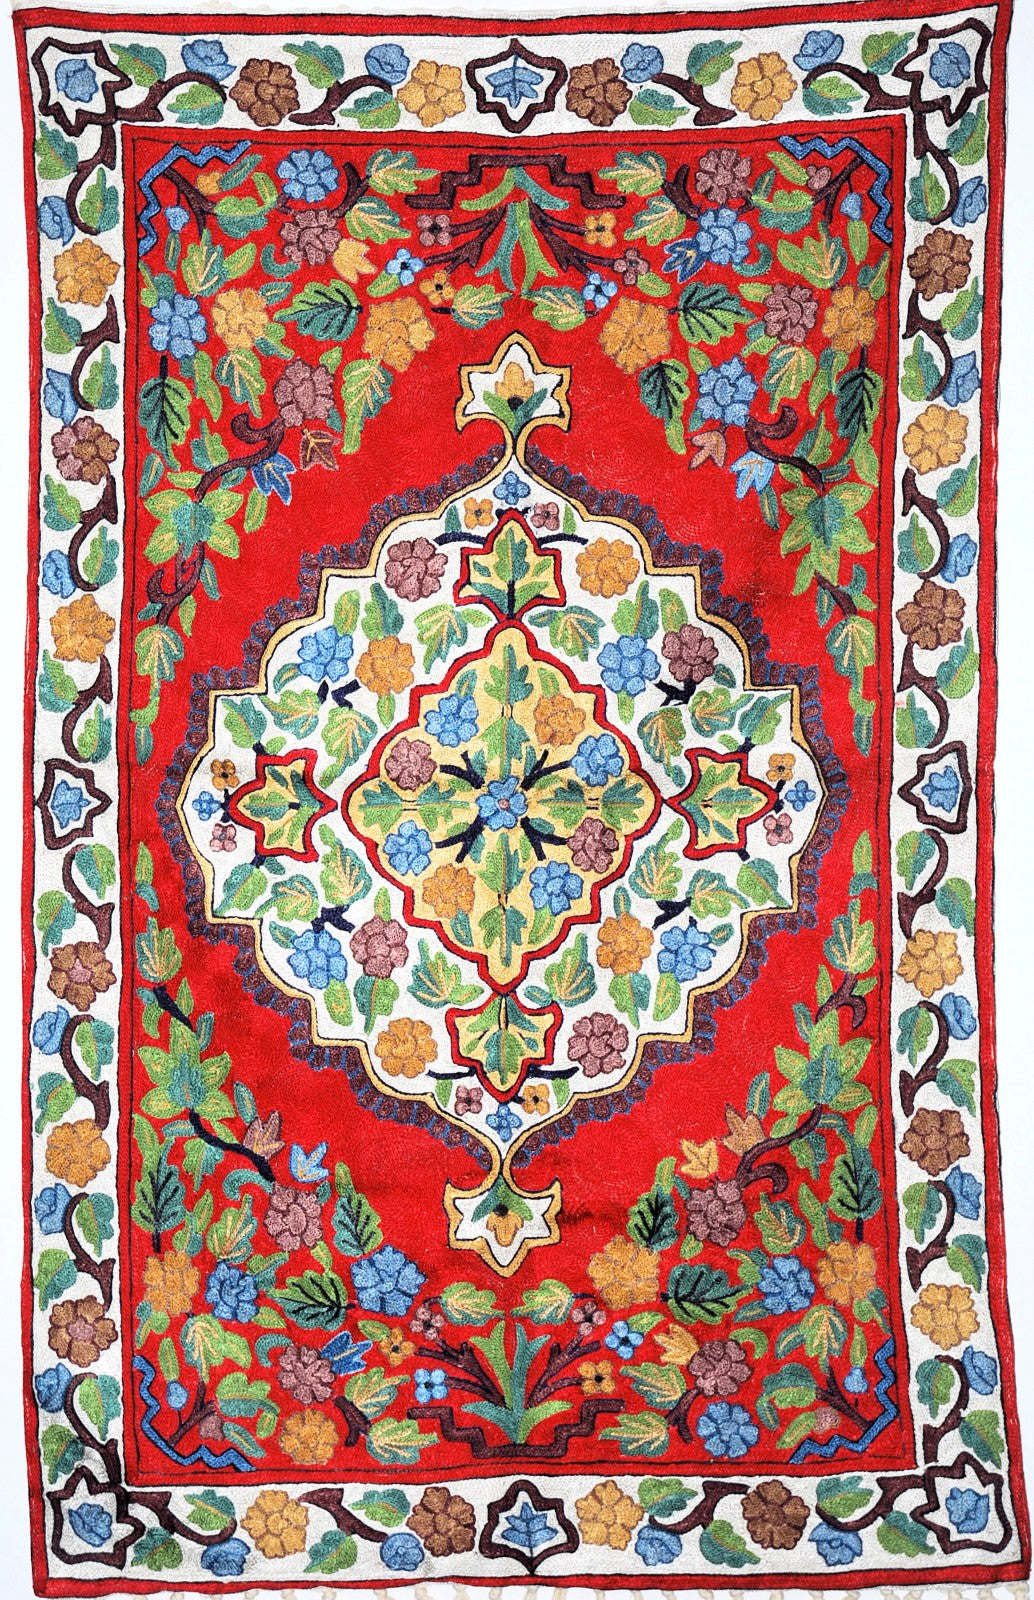 ChainStitch Tapestry Silk Area Rug, Multicolor Embroidery 2.5x4 feet #CWR10101